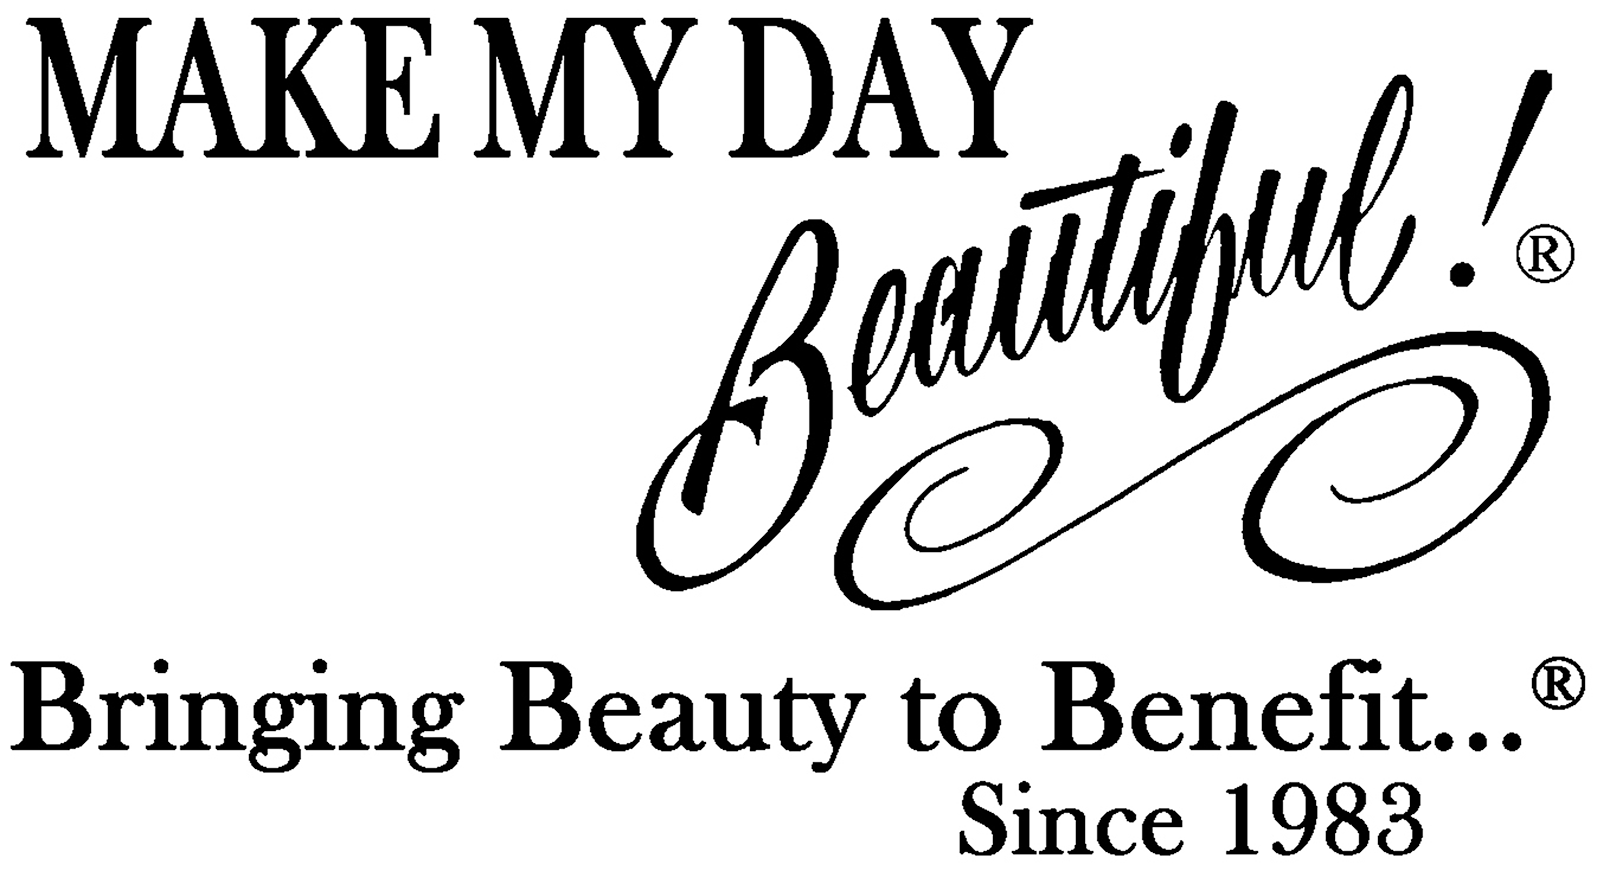 Make My Day Beautiful Sponsor for the George Lopez Celebrity Golf Classic 